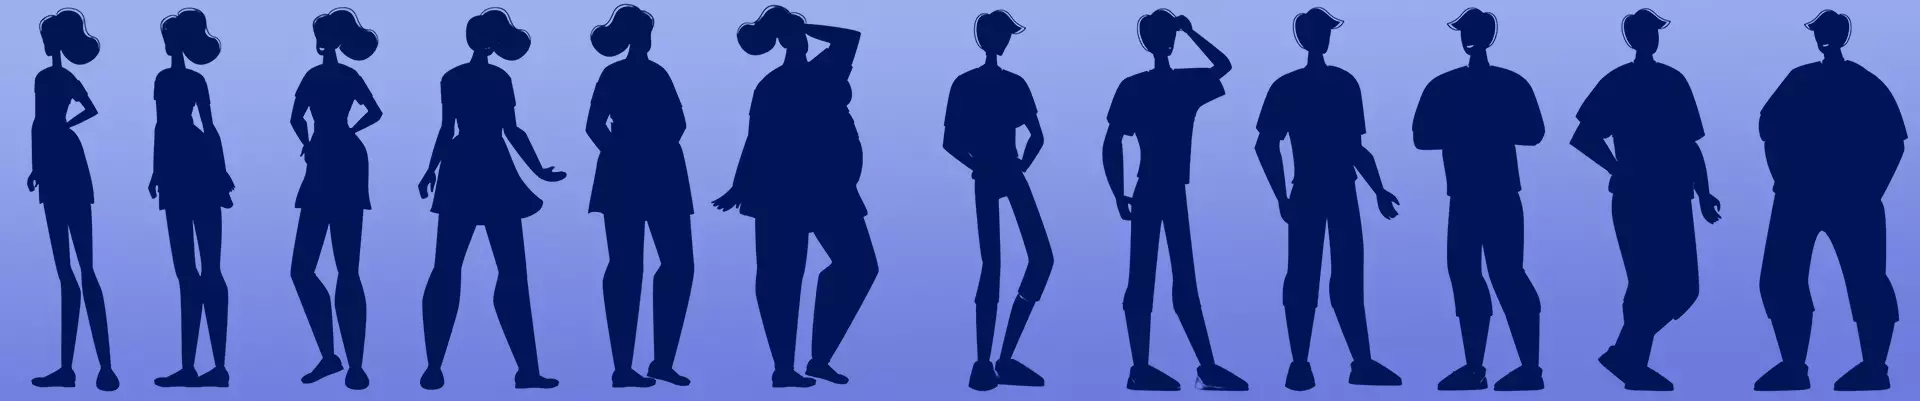 Illustration of different sized men and womans bodies